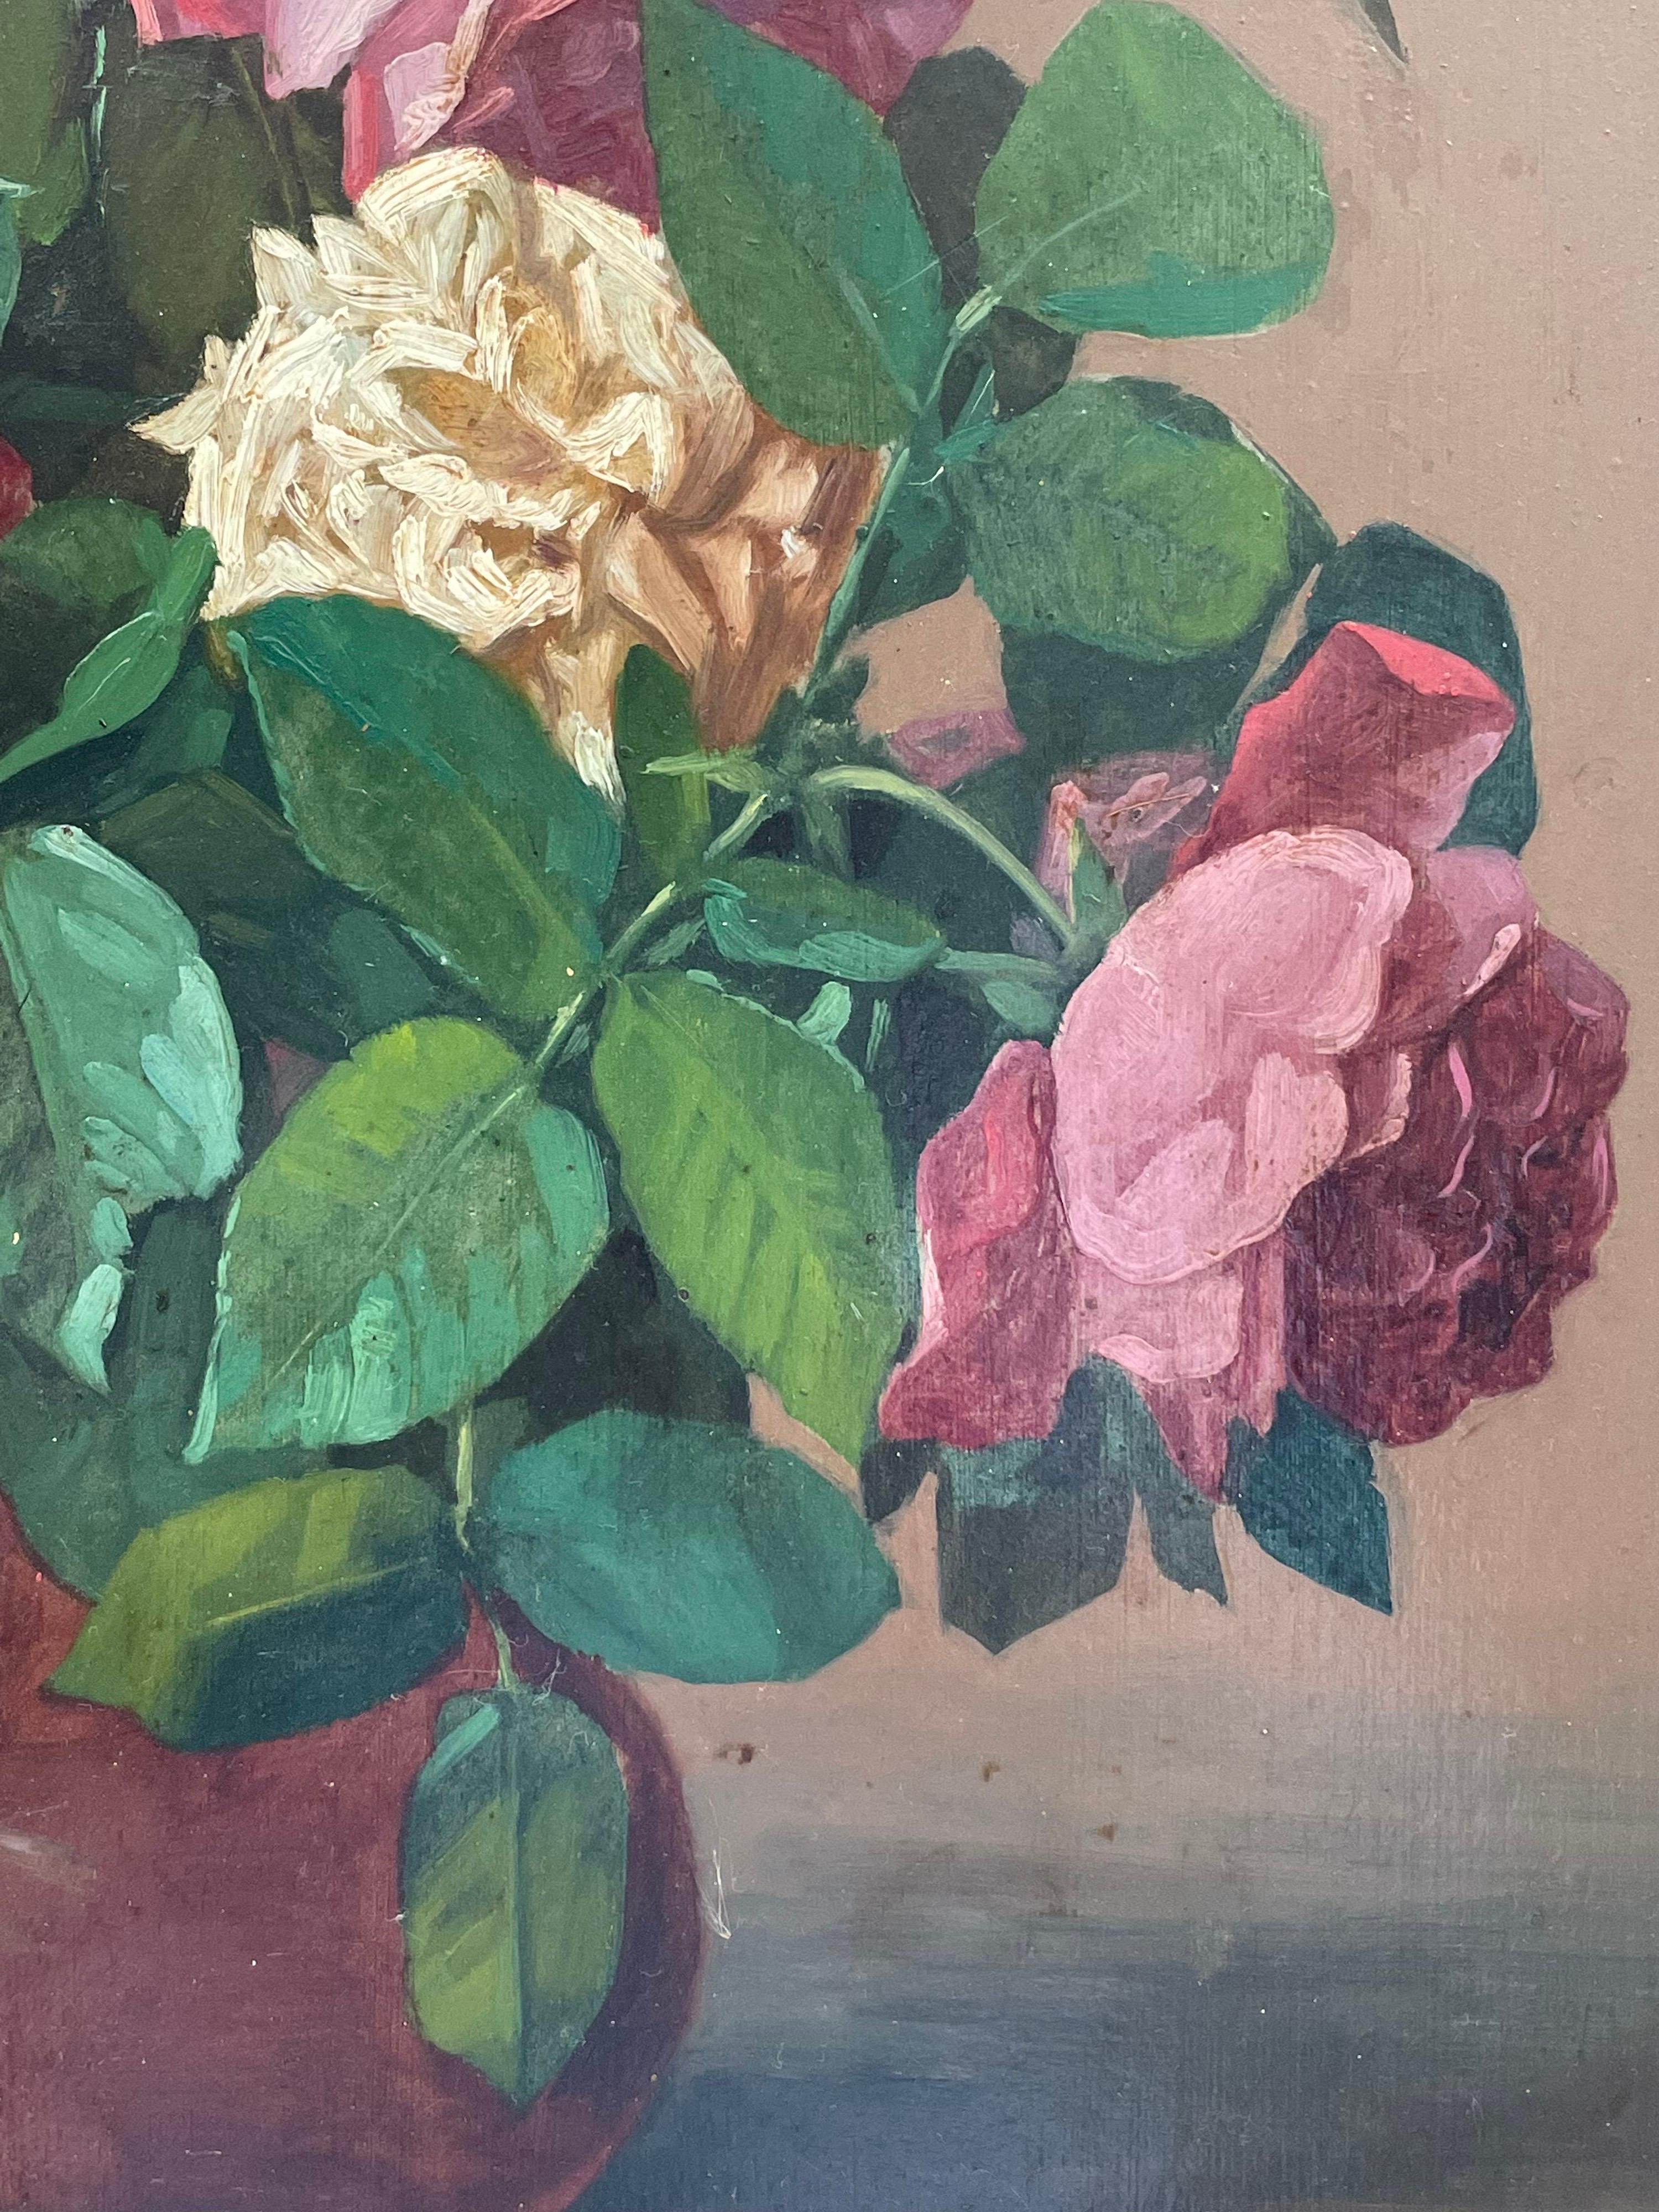 Roses in a Bowl
by Isidore Rosenstock (French, 1880-1956)
signed lower corner
oil painting on board, framed
framed size: 26 x 23 inches
condition: overall very good and pleasing; antique period frame has a few knocks and fragile areas though this is